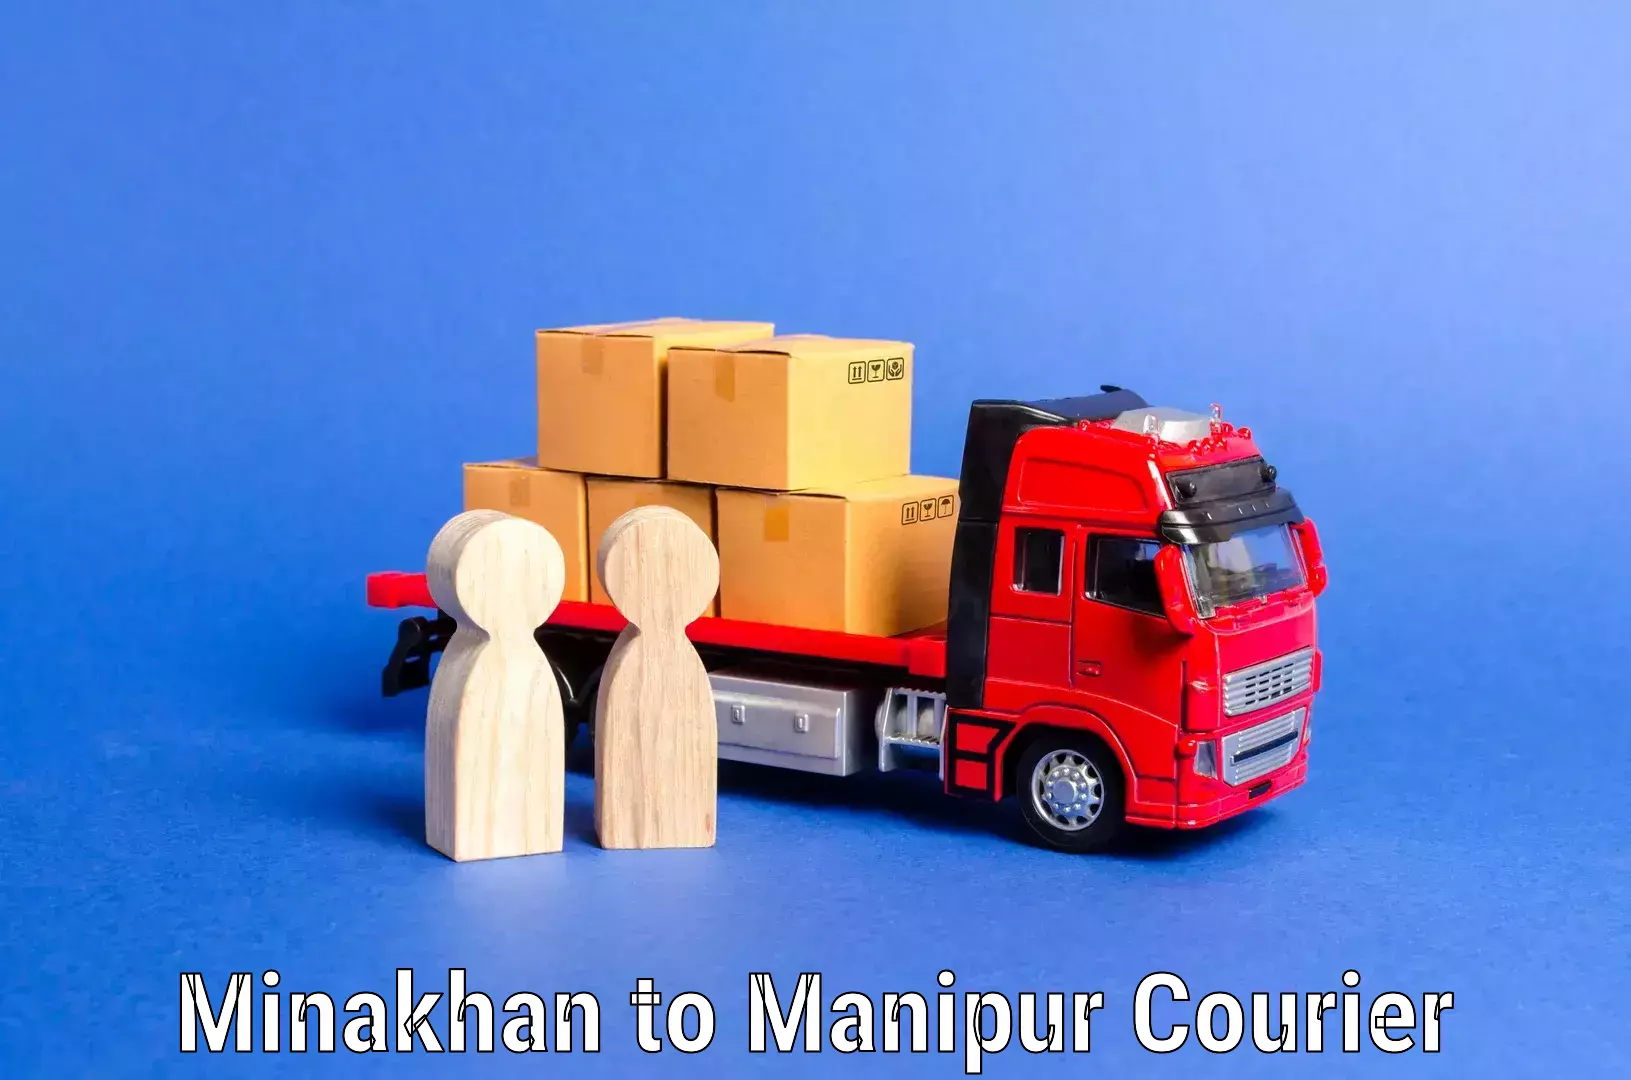 Furniture delivery service Minakhan to Manipur